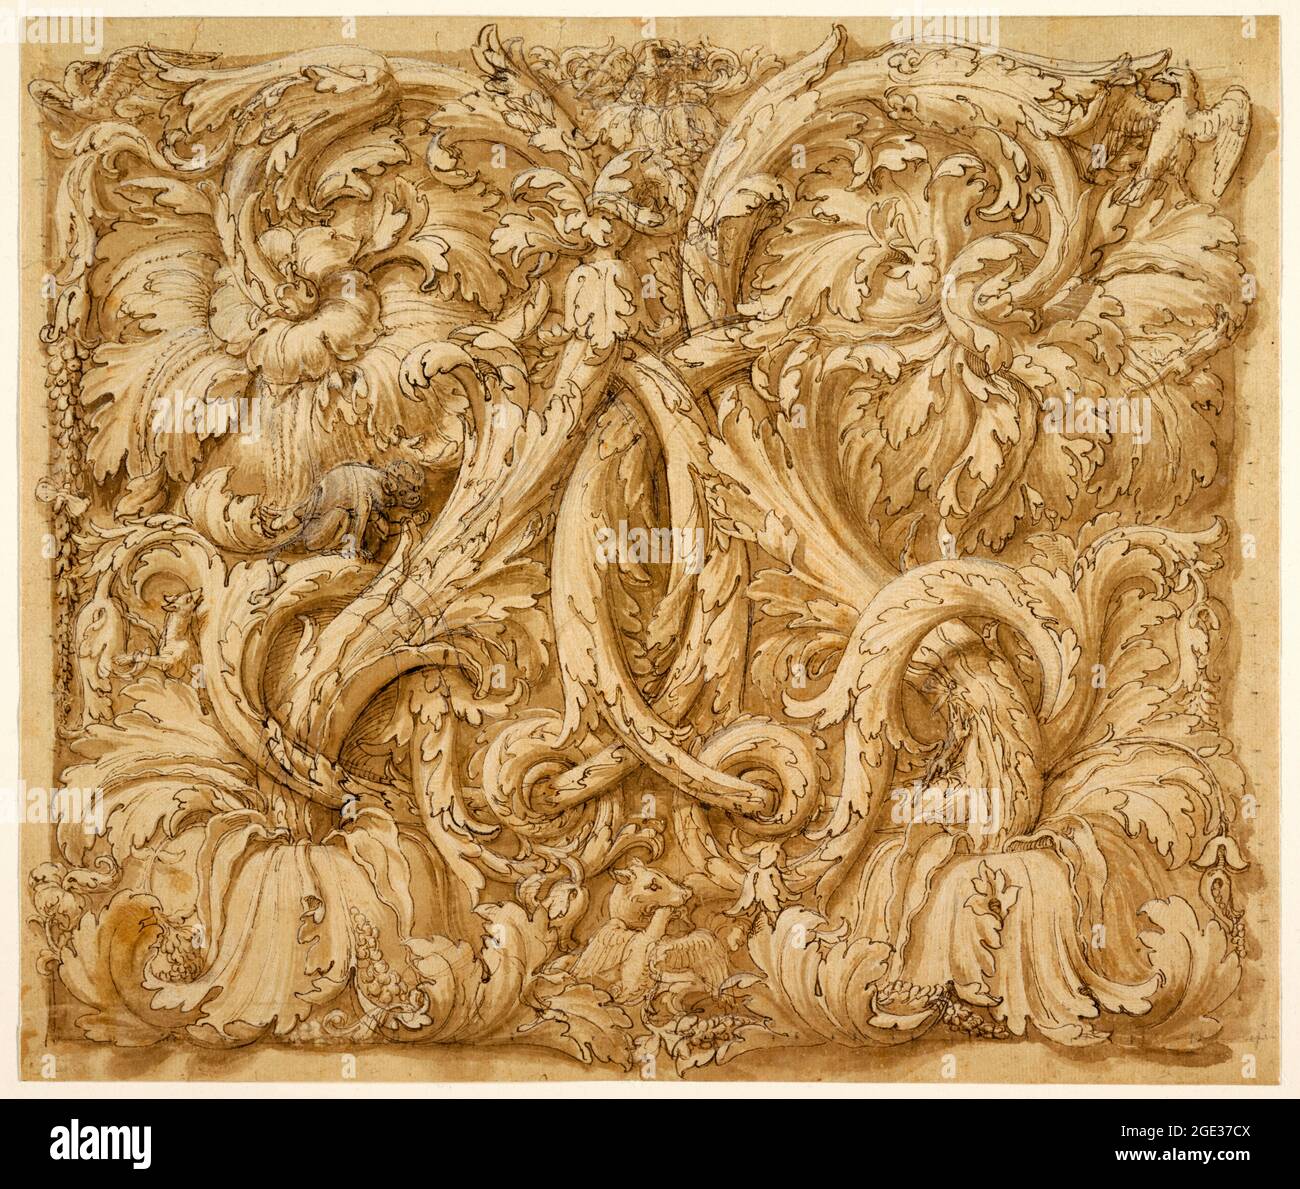 Giulio Romano (Giulio Pippi), Design for Acanthus Rinçeaux with Animals and Birds, dessin, 1524-1545 Banque D'Images